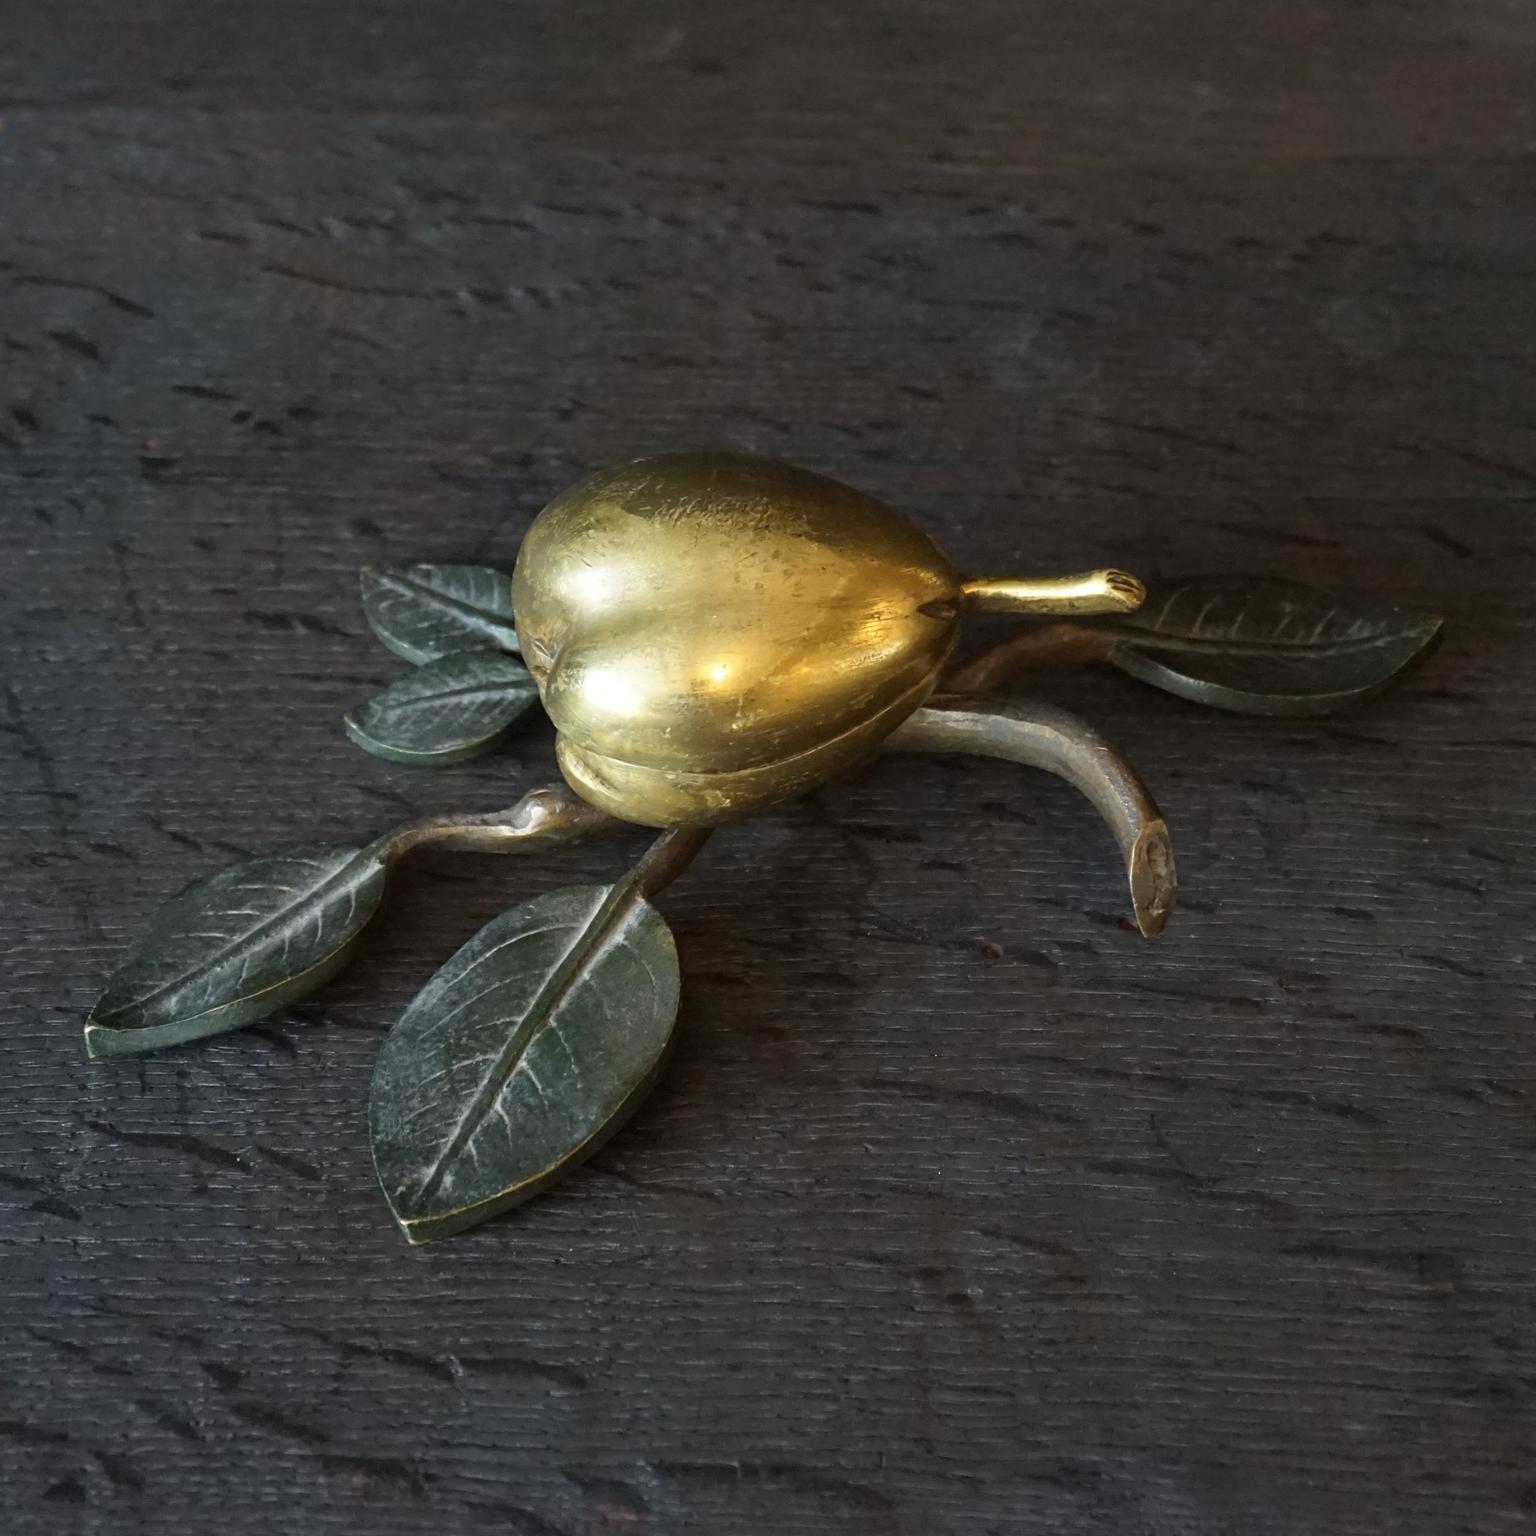 Antique hinged bronze two toned paint patinated pear on a twig with green painted leaves, to keep or collect your little trinkets in.
This used to be called a bed-pear, for putting your jewellery in on your nightstand before going to bed. But